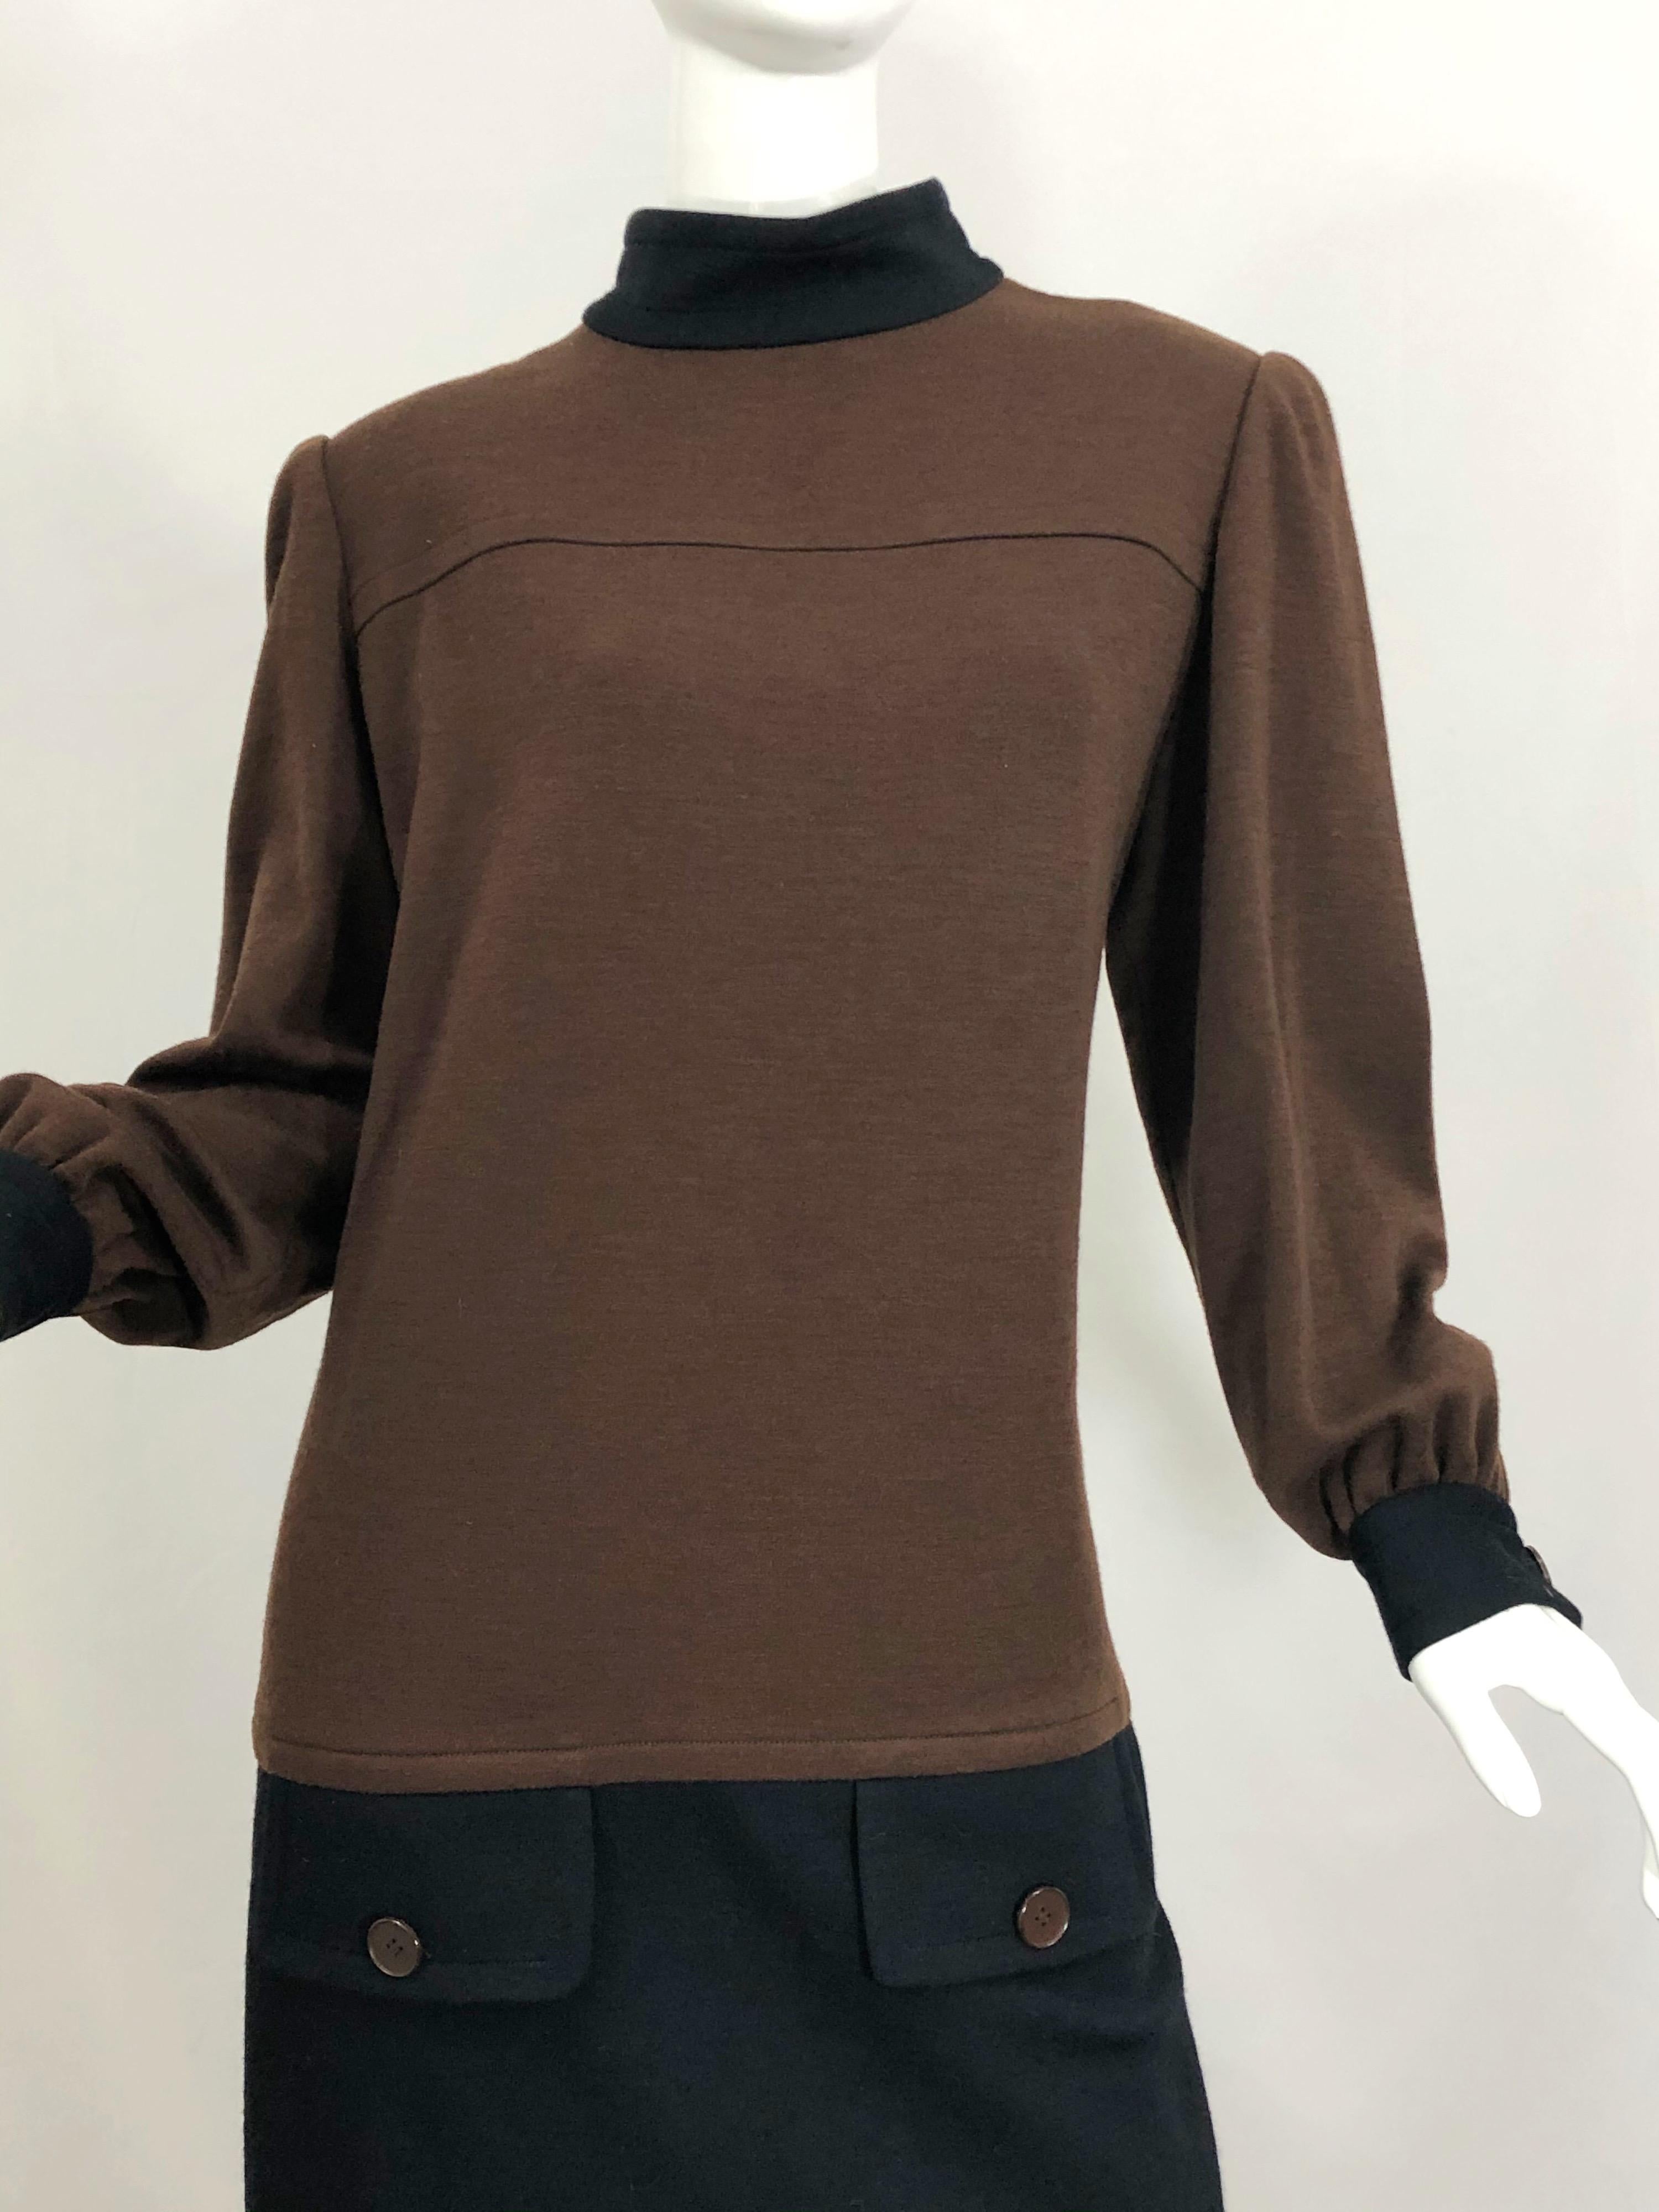 Vintage 80s Givenchy Brown and Black Virgin Wool Long Sleeve Mock Neck Sac Dress In Excellent Condition For Sale In San Diego, CA